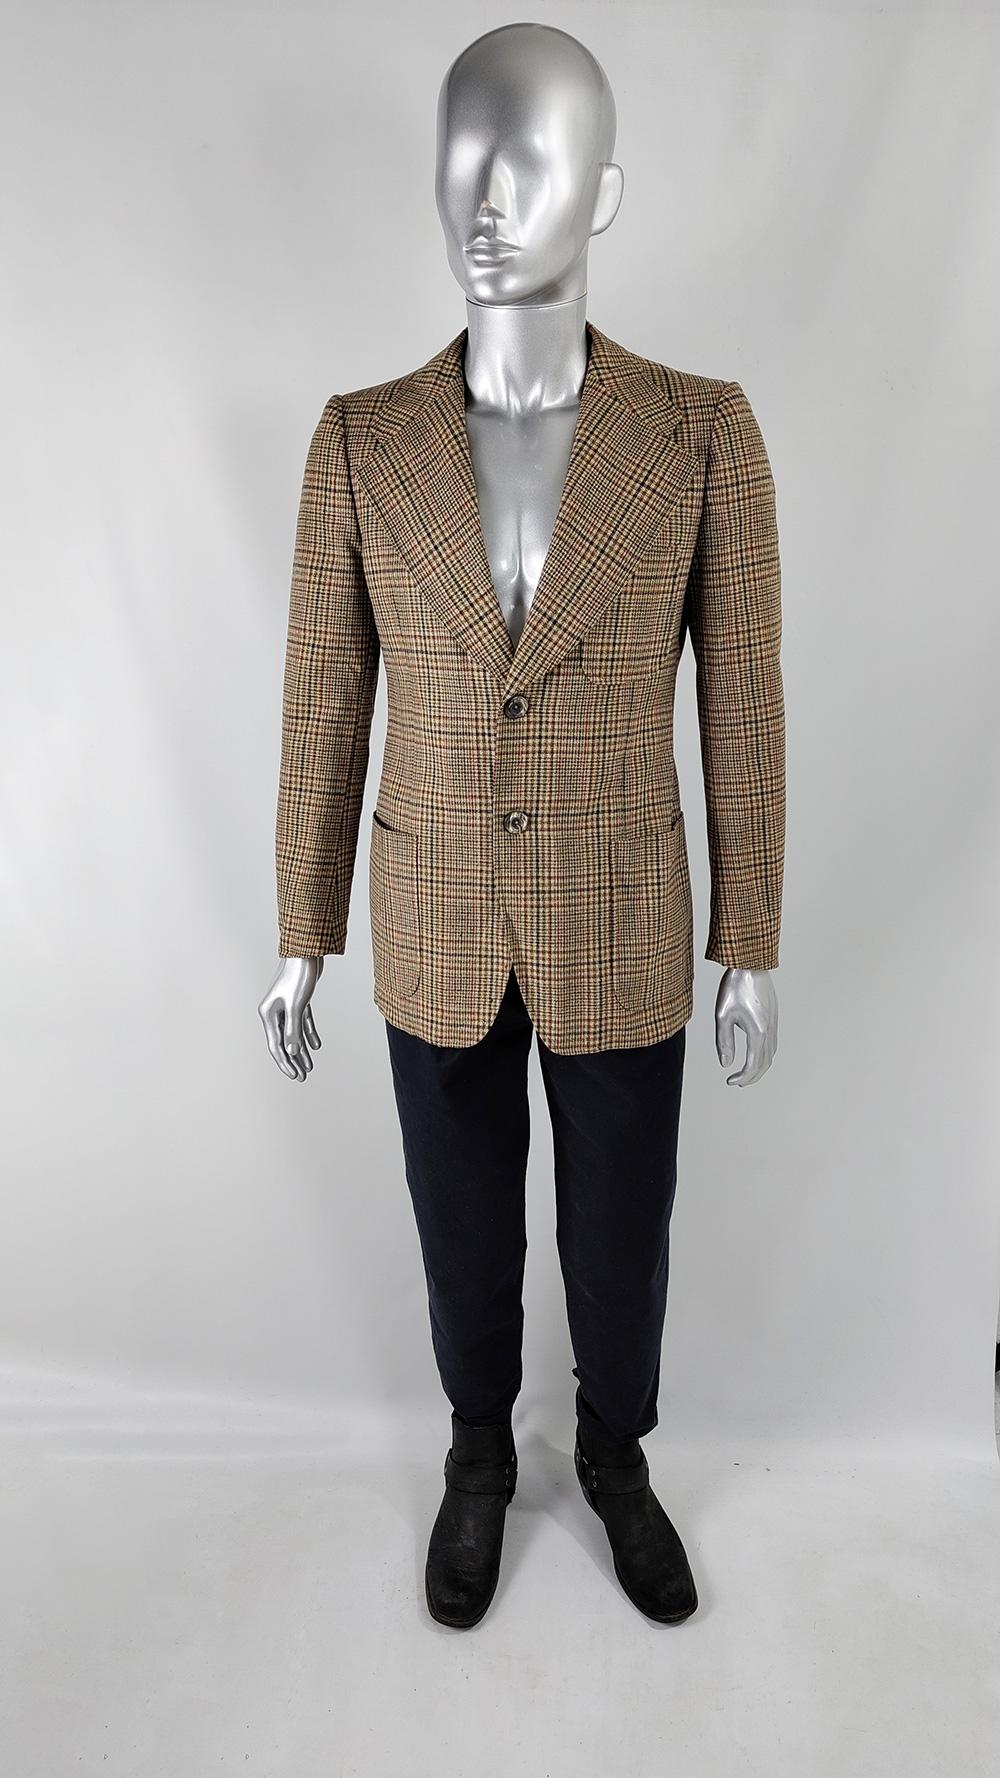 A stylish and high quality vintage mens blazer / sport coat from the 1970s. Made from a wool tweed with a plaid check throughout, it has super wide lapels, large patch pockets and double vents to the rear, adding a flamboyant flair to the classic